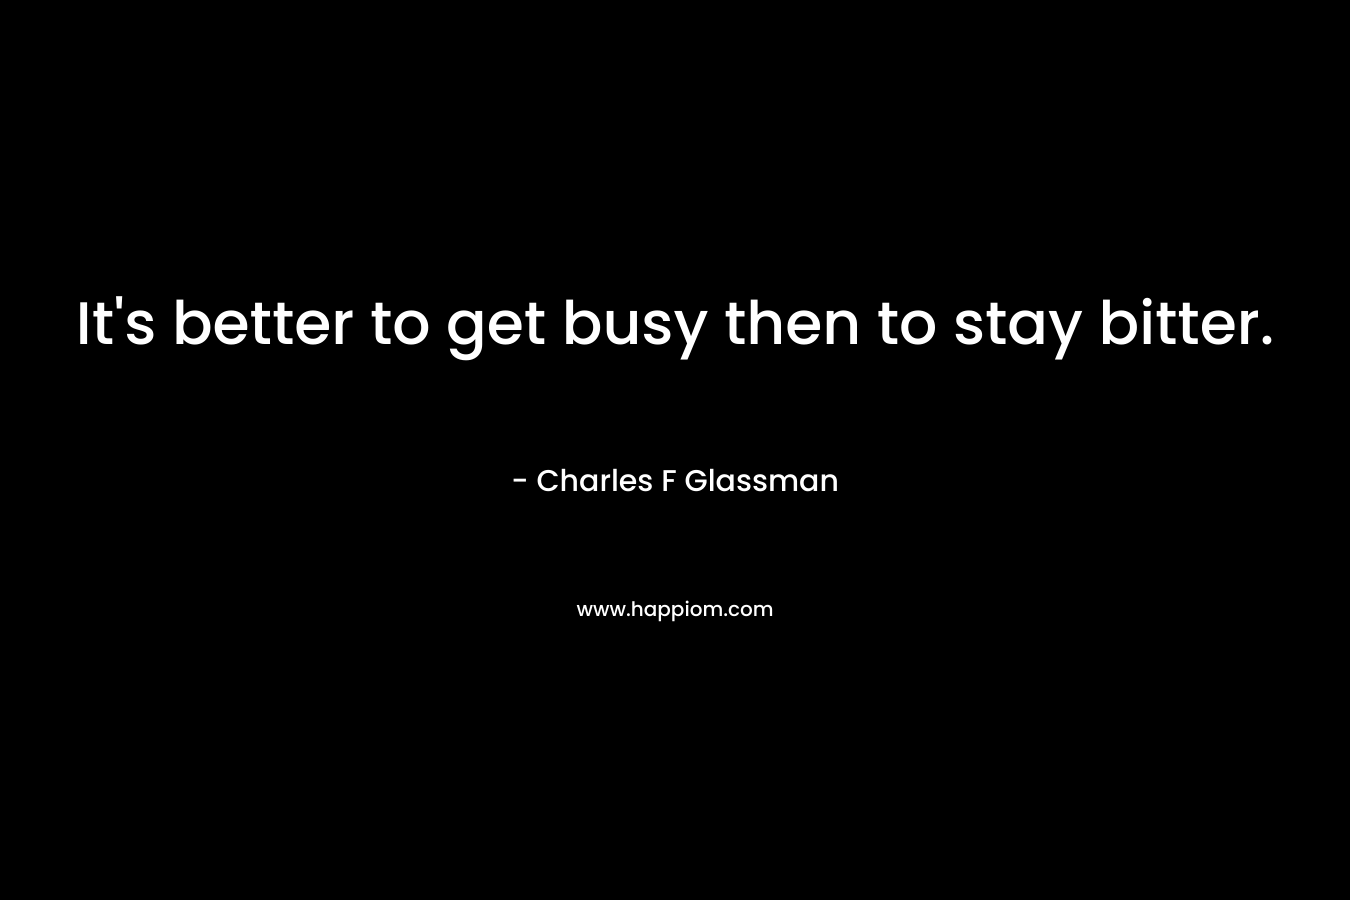 It's better to get busy then to stay bitter.